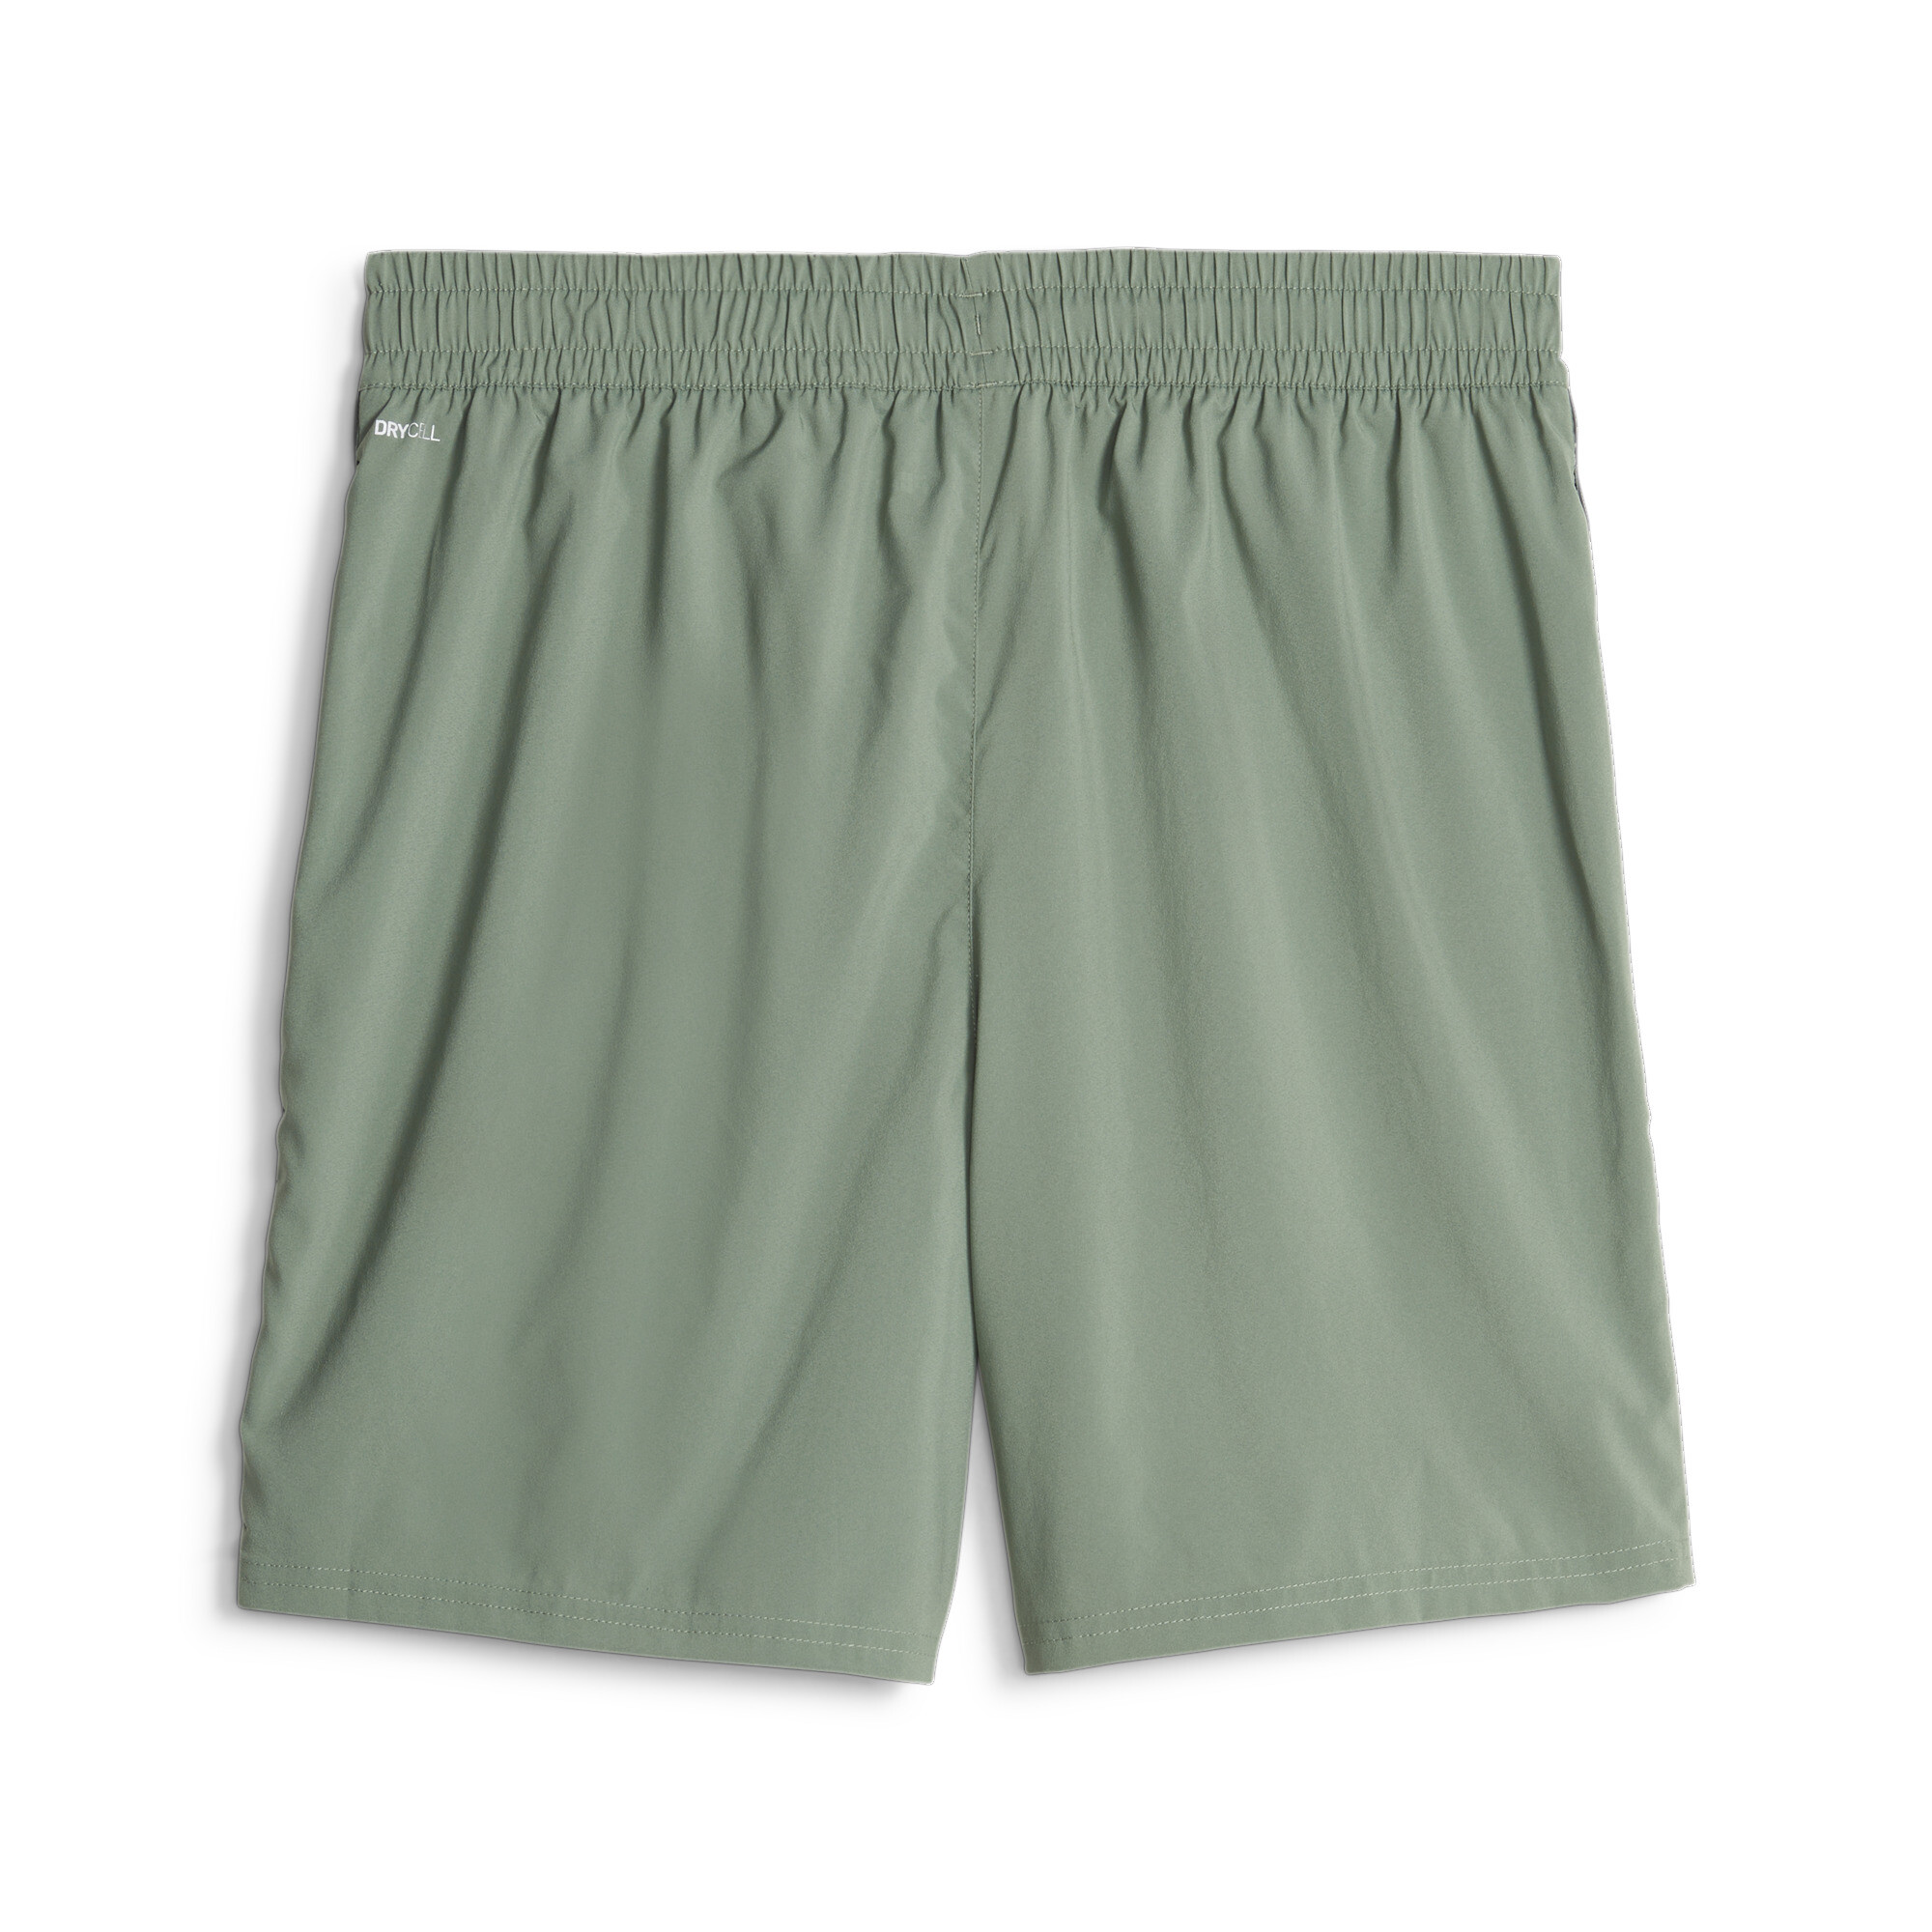 Men's PUMA Fit 7 Training Shorts In Green, Size XS